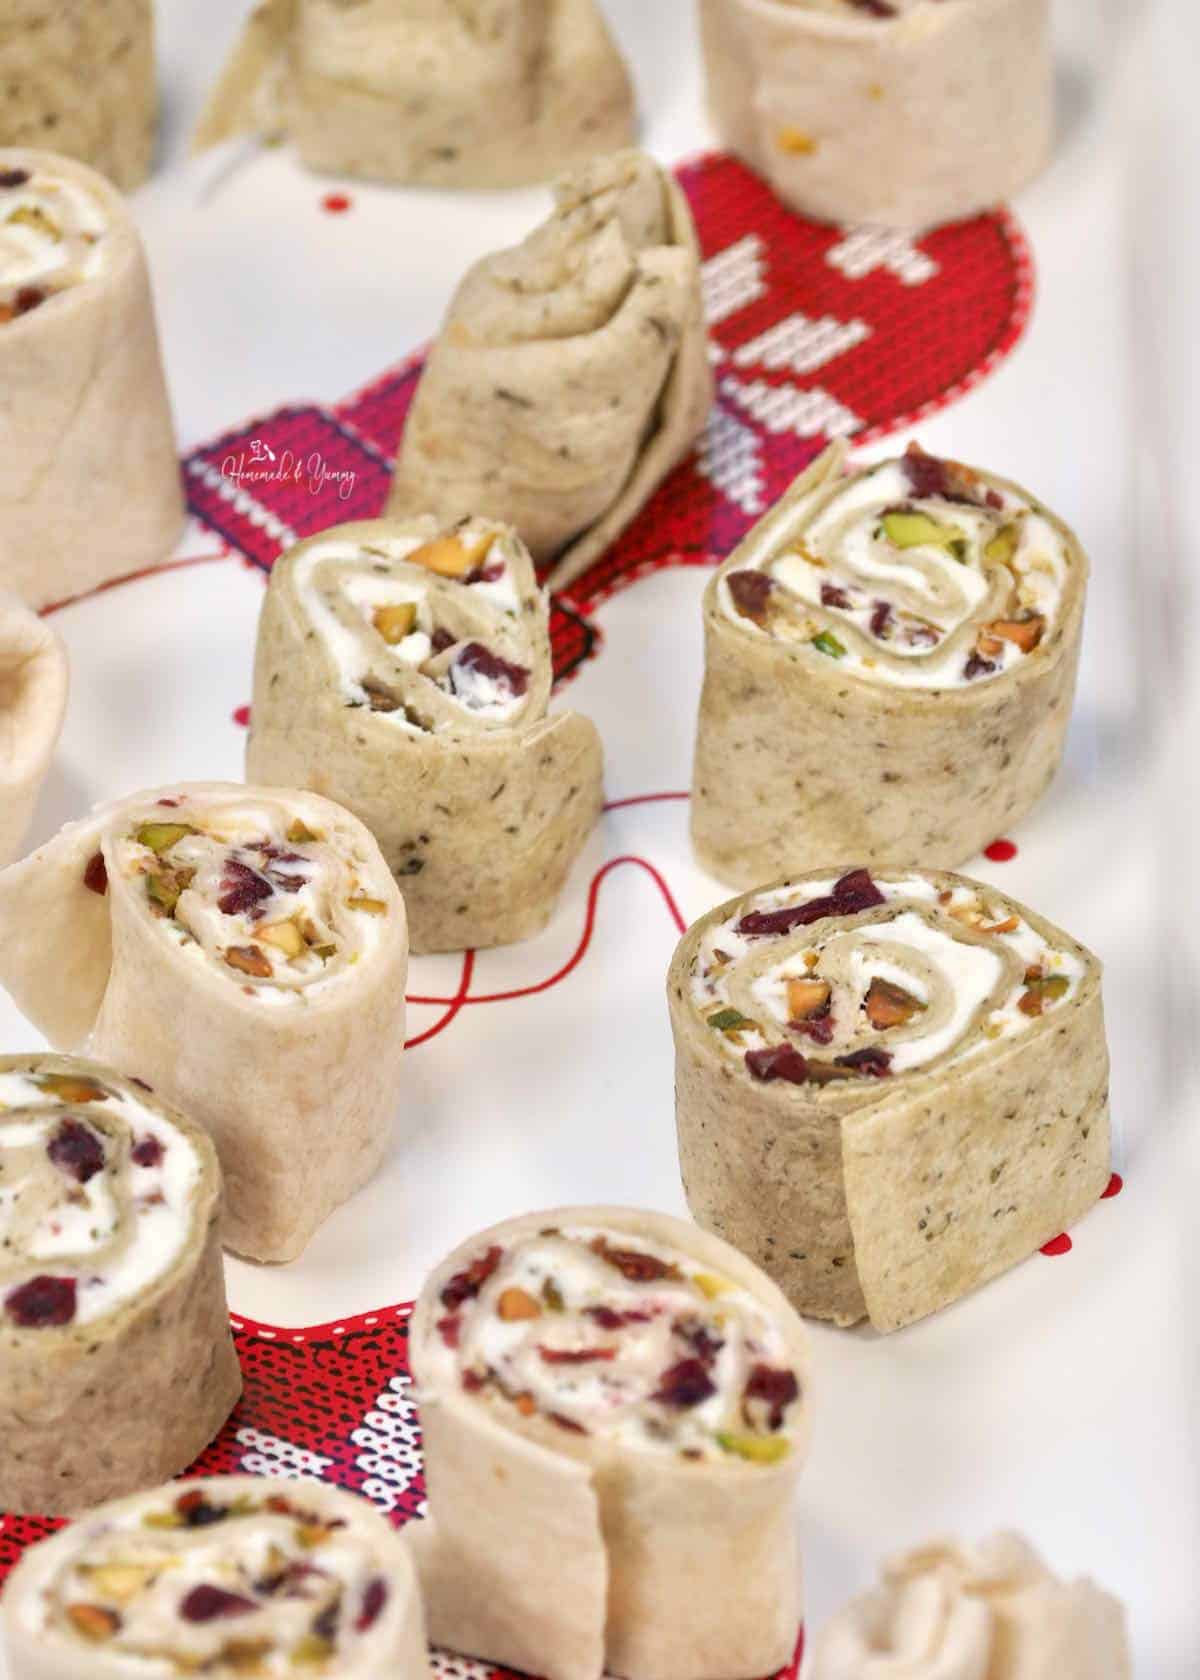 A tray of festive pinwheel appetizers with cream cheese, cranberries and nuts.